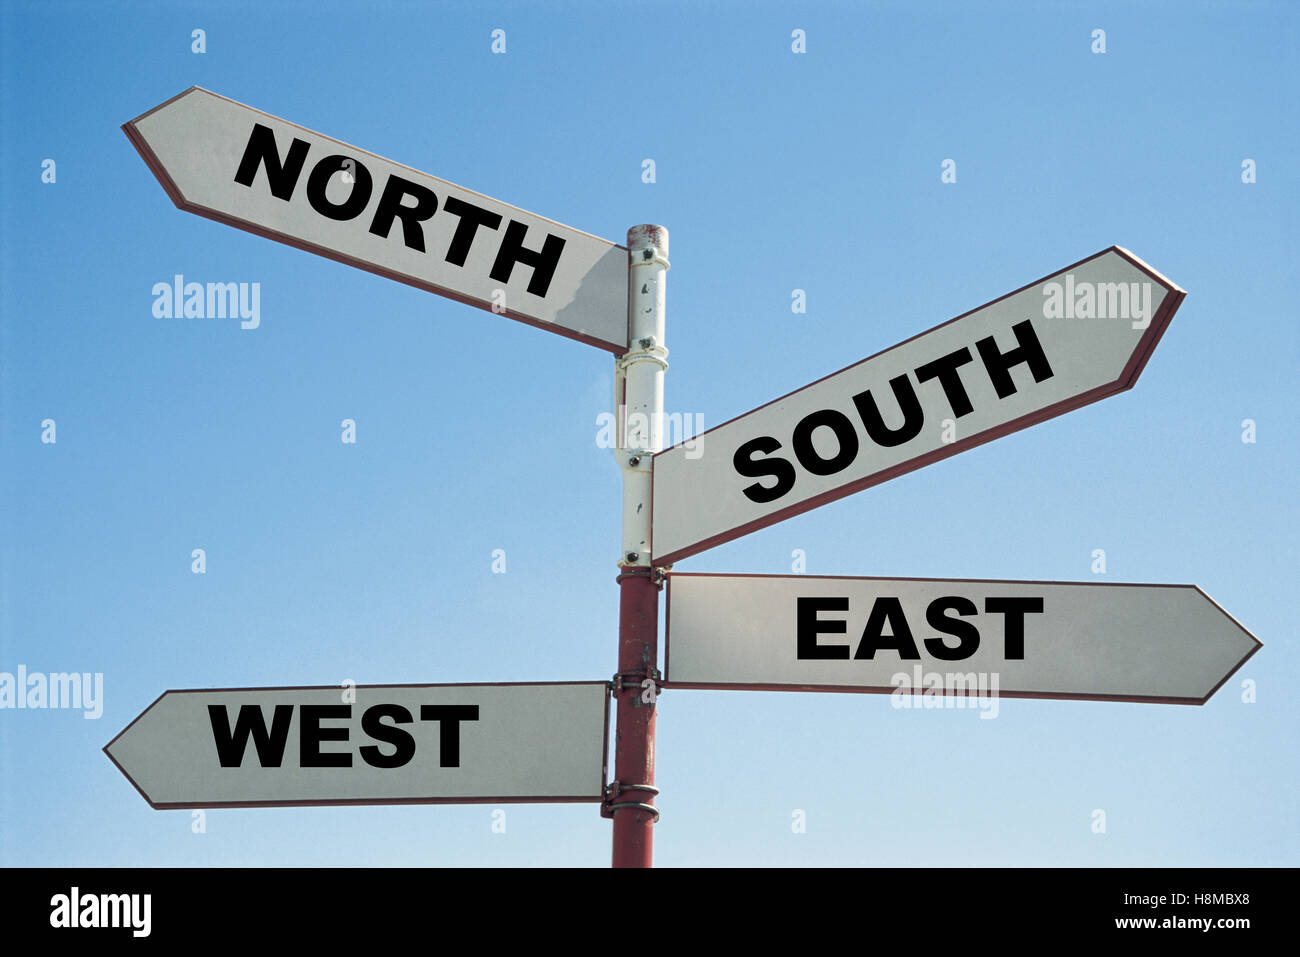 north south east west sign Stock Photo